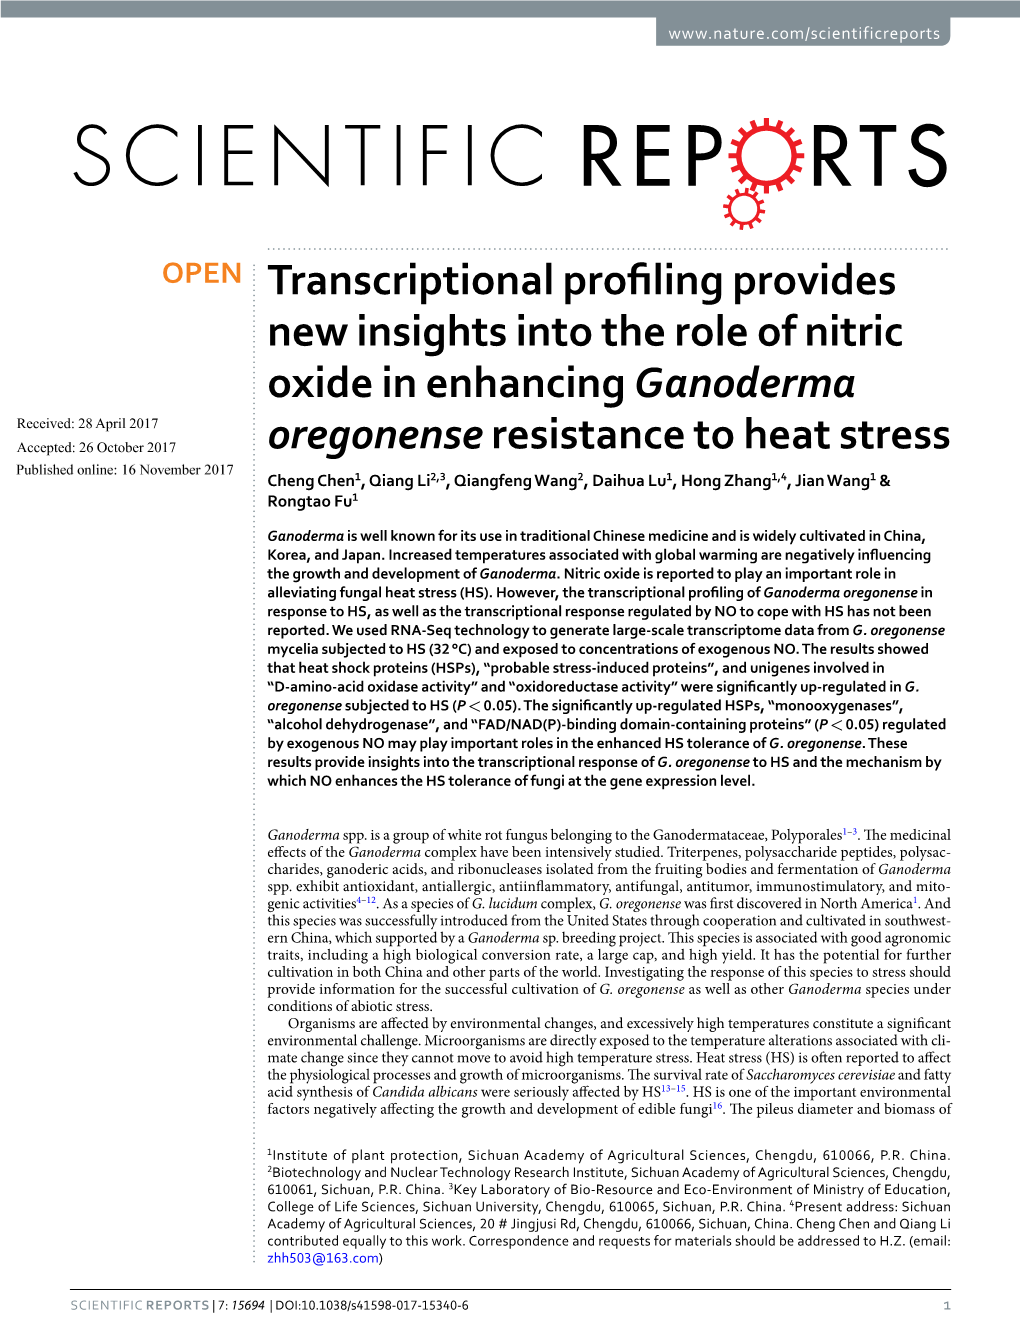 Transcriptional Profiling Provides New Insights Into the Role of Nitric Oxide